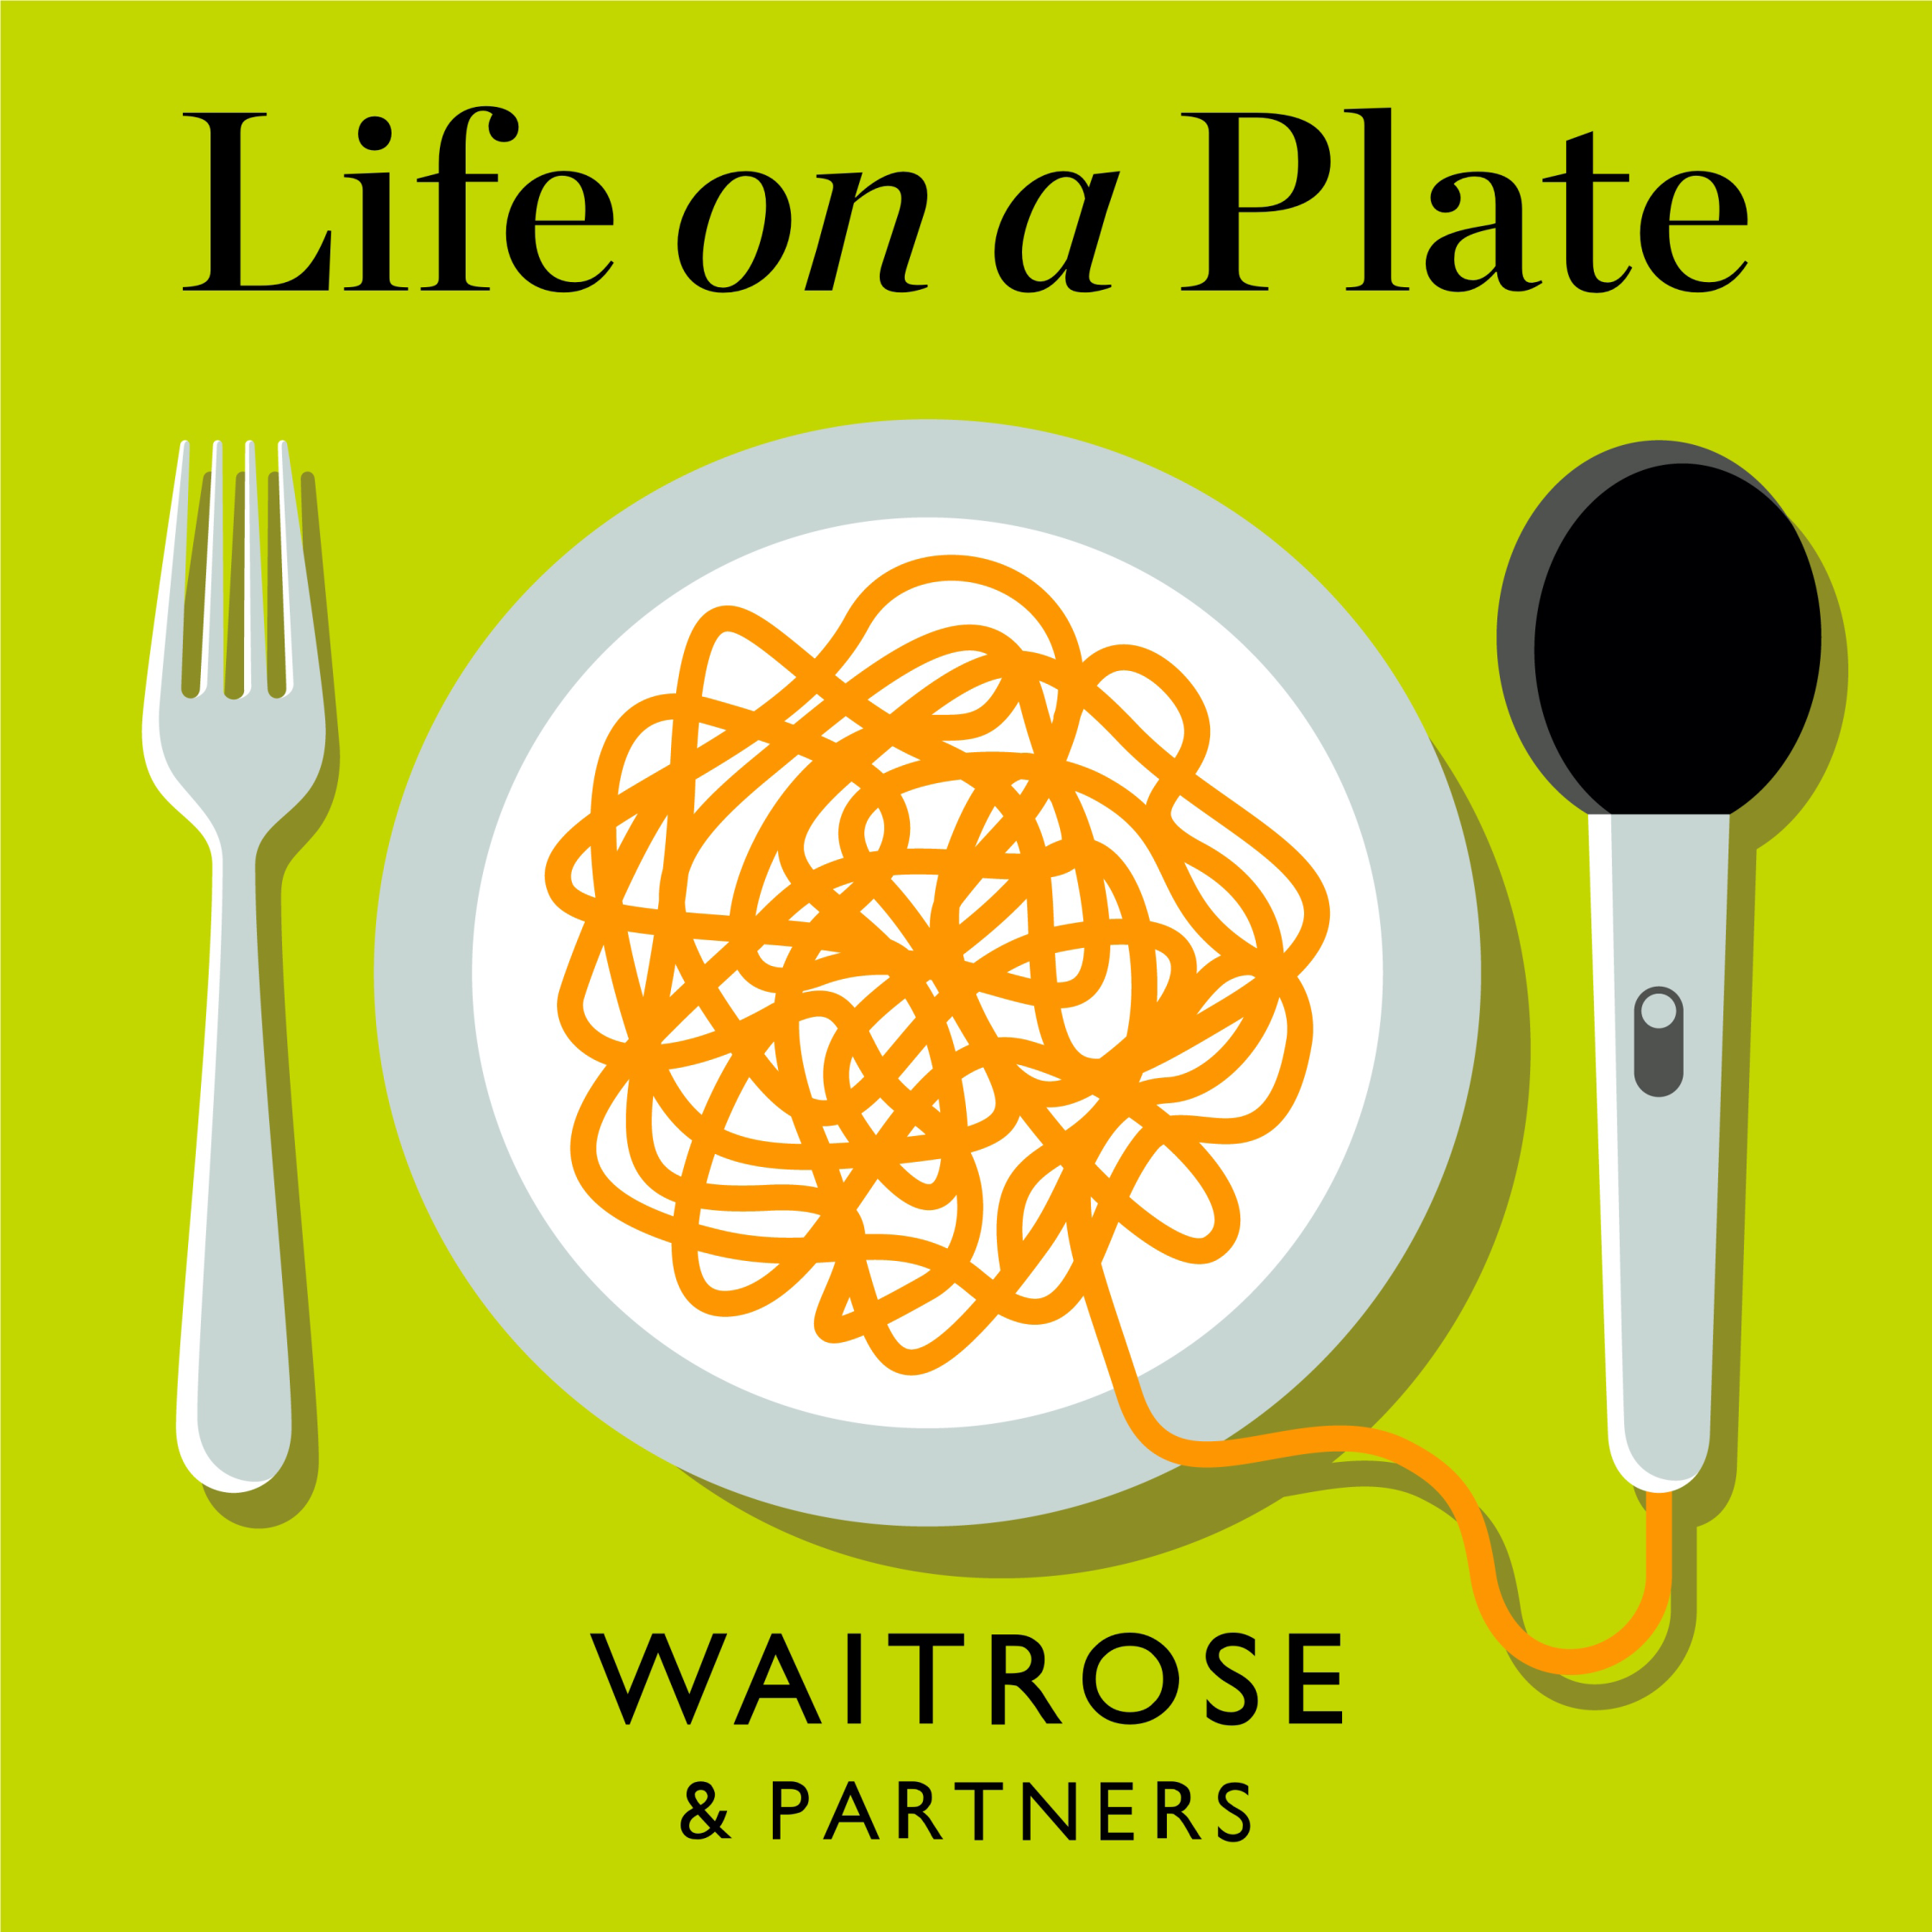 Waitrose-podcast-life-on-a-plate.png